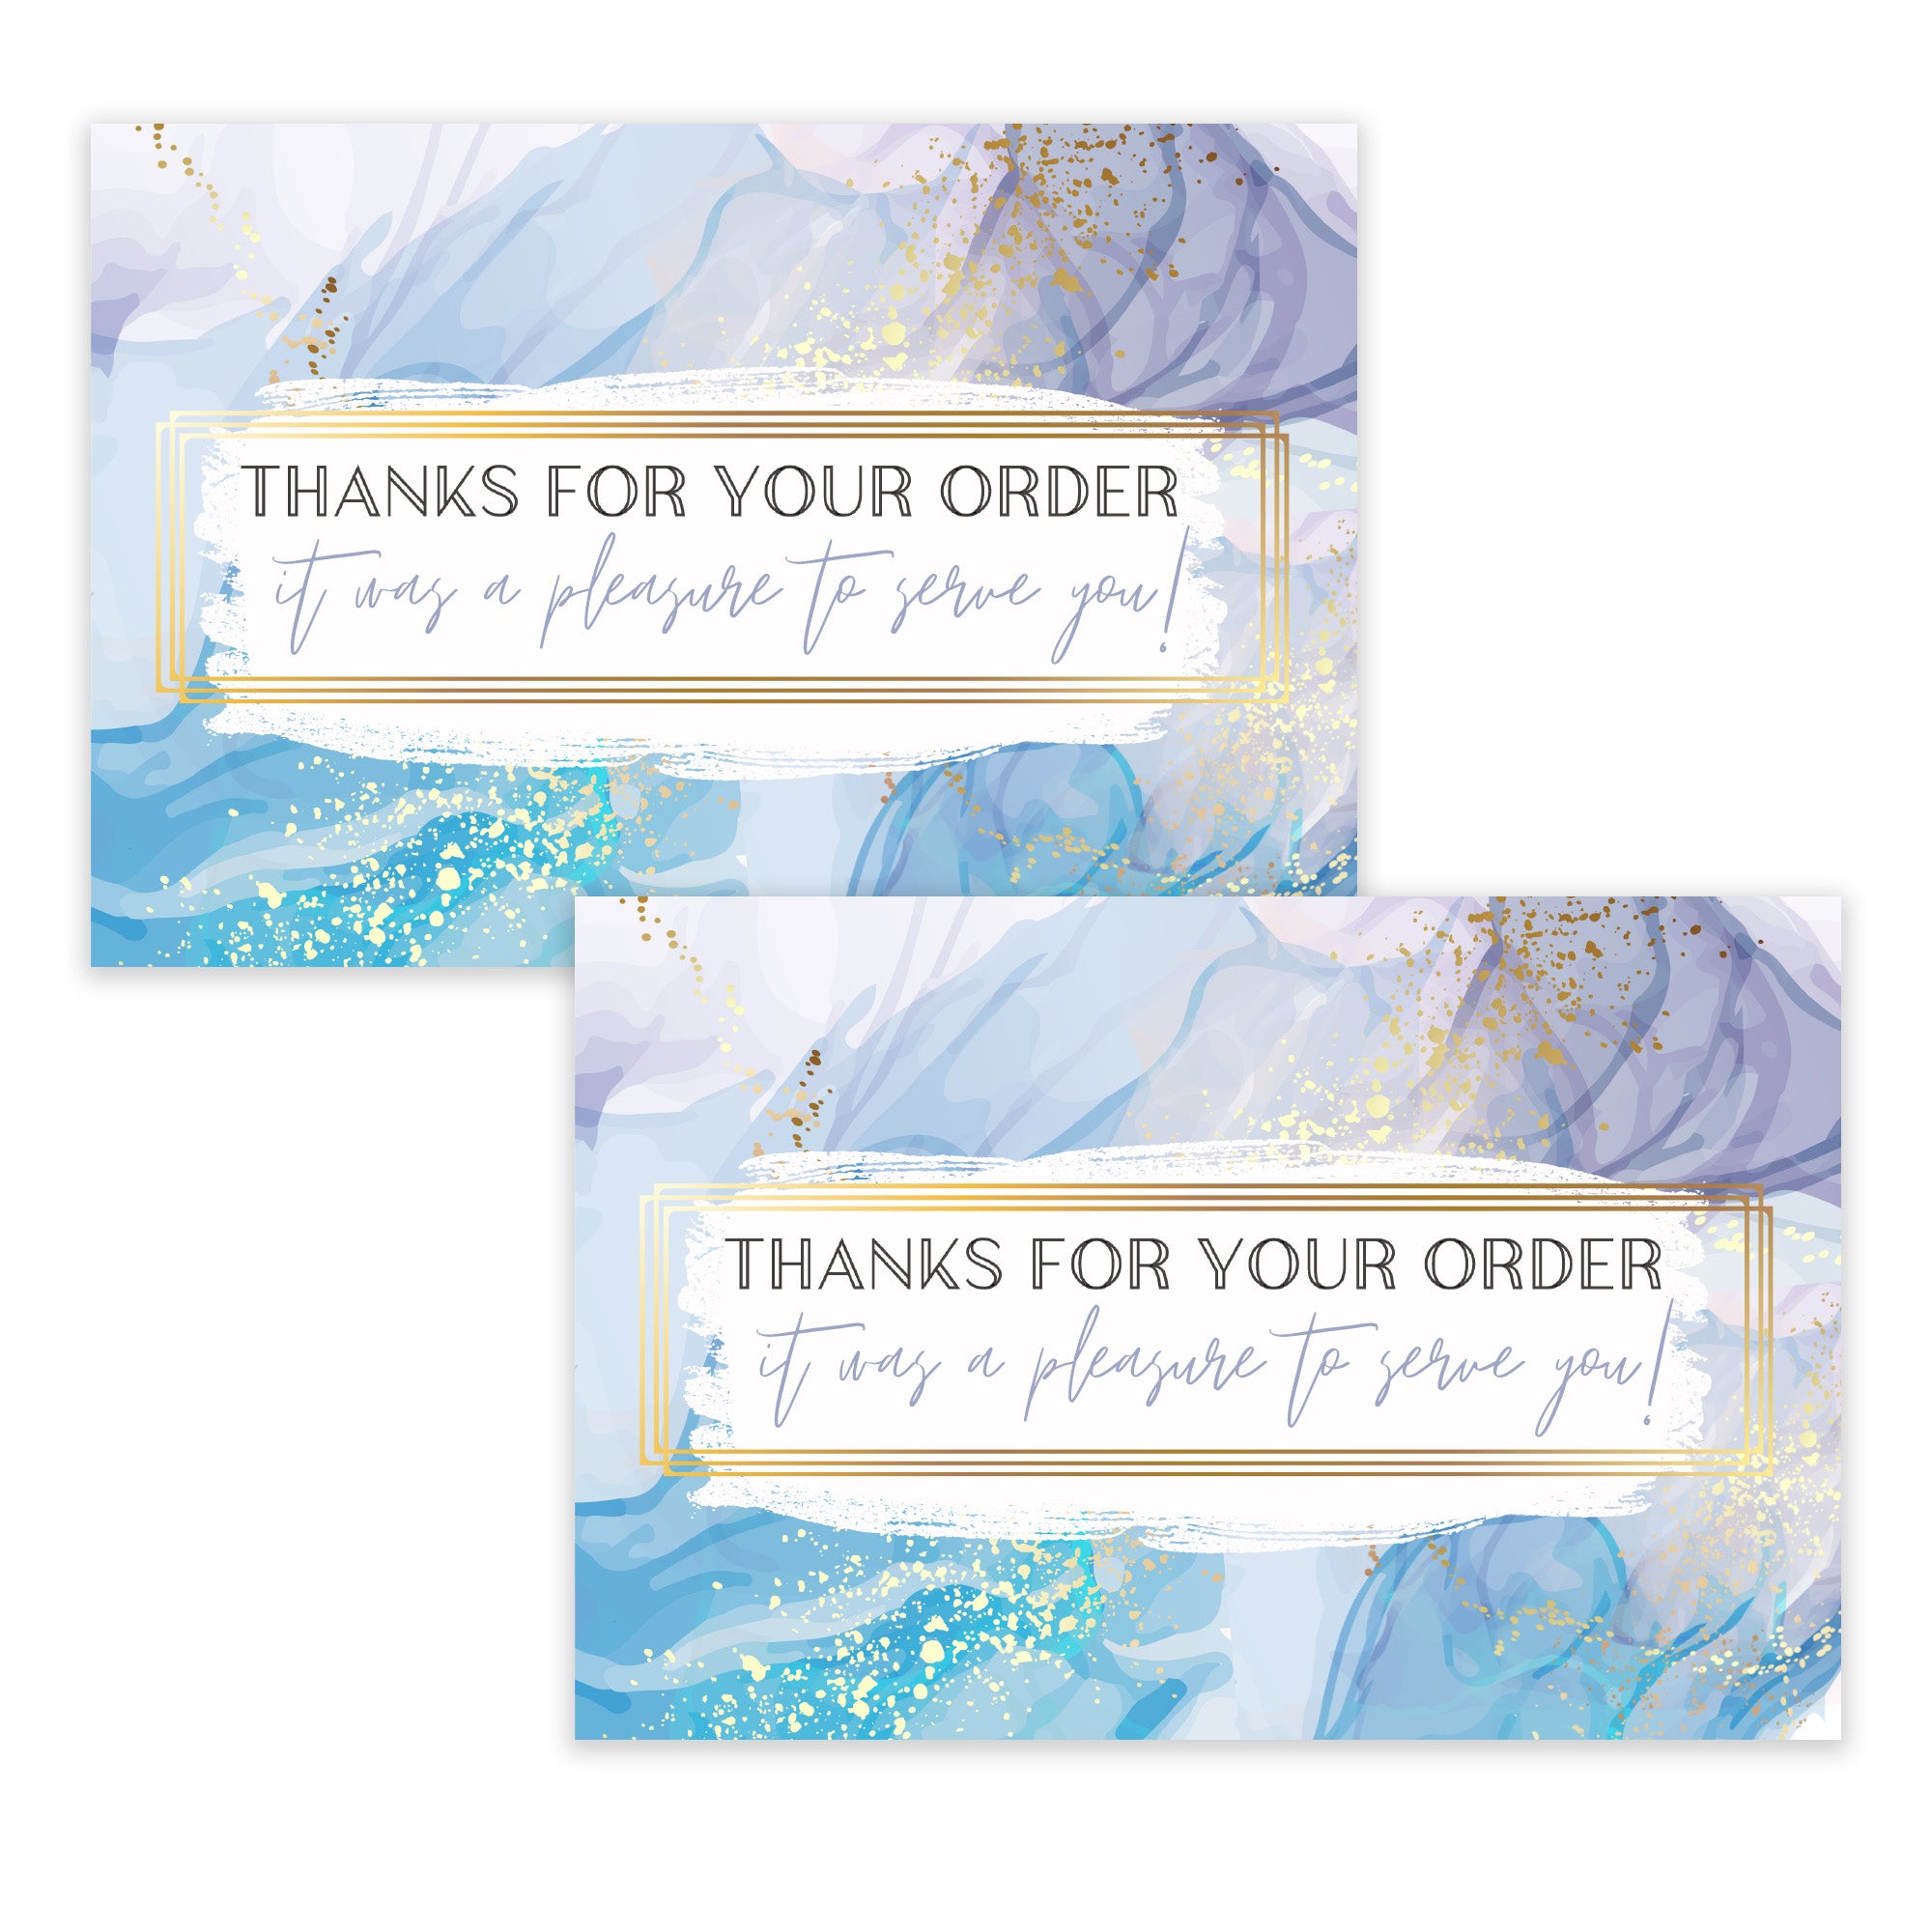 Kraft Business card size thank you cards for your small business -  CutCardStock